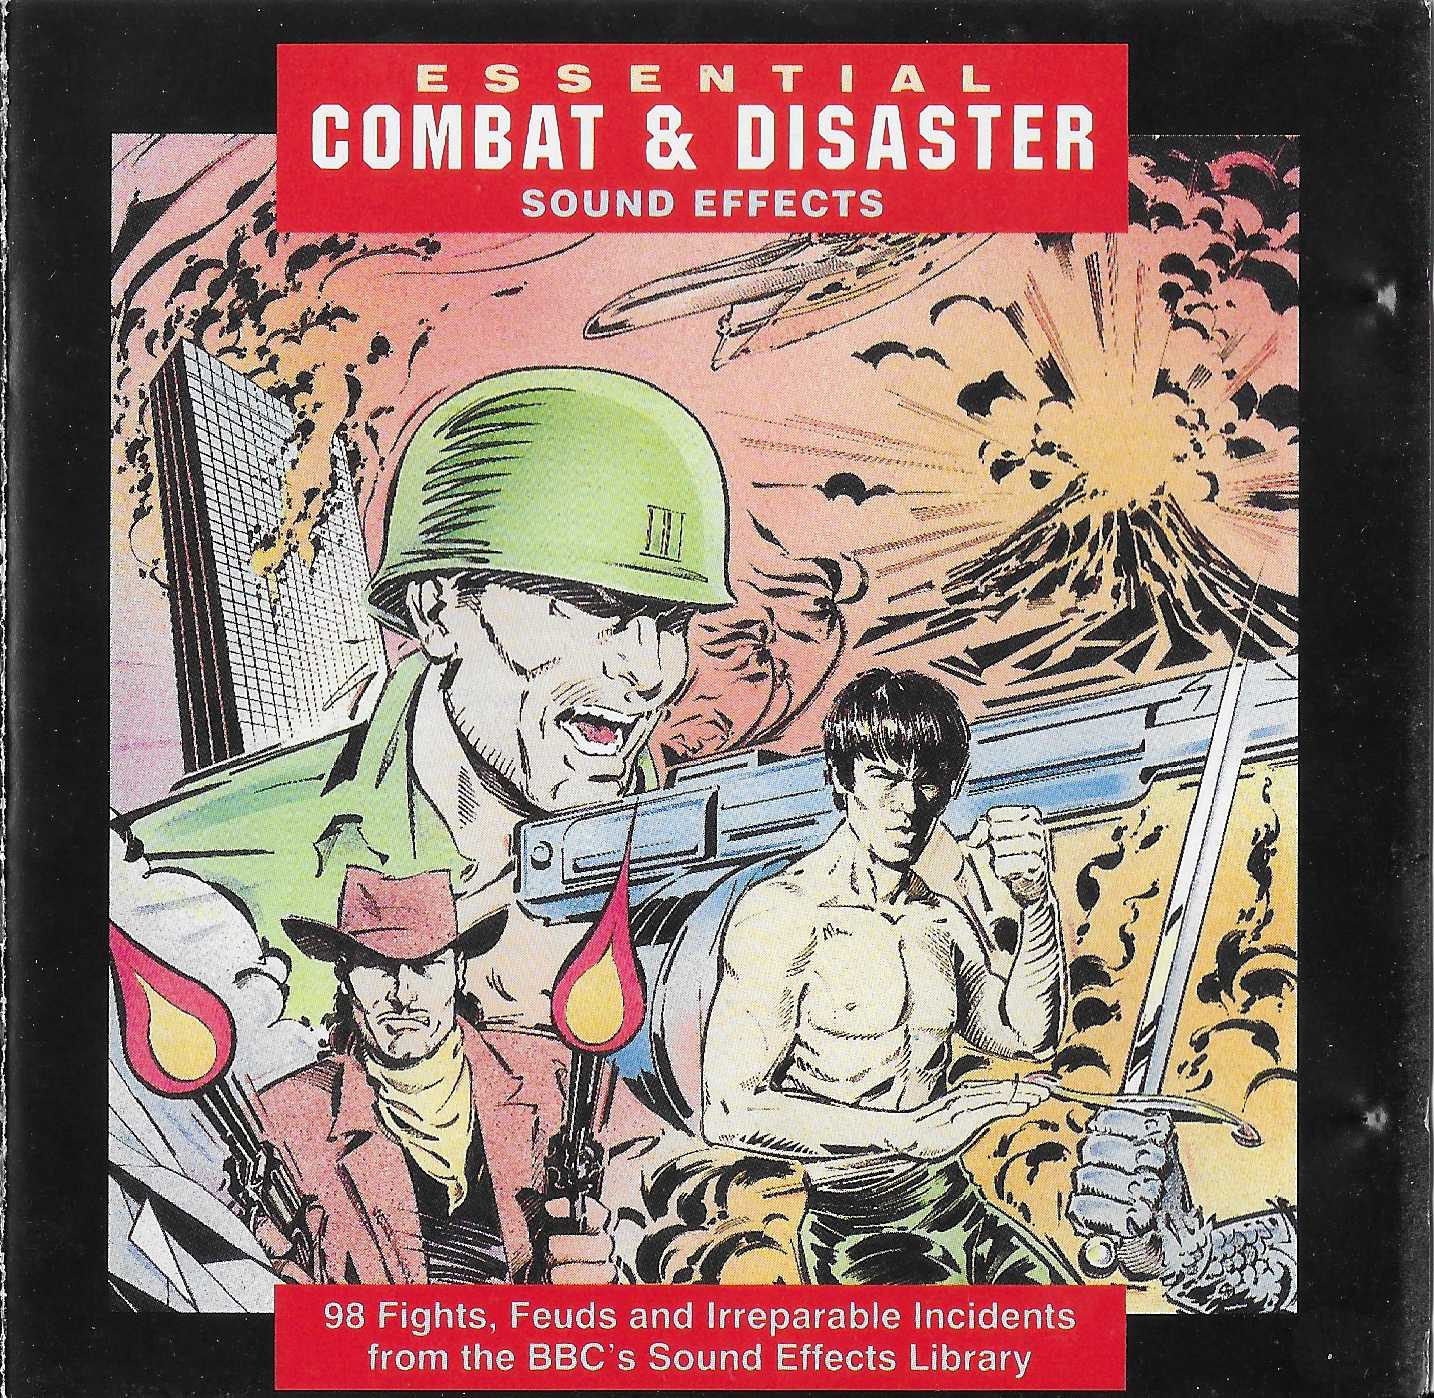 Picture of BBCCD839 Essential combat & disasters sound effects by artist Various from the BBC cds - Records and Tapes library